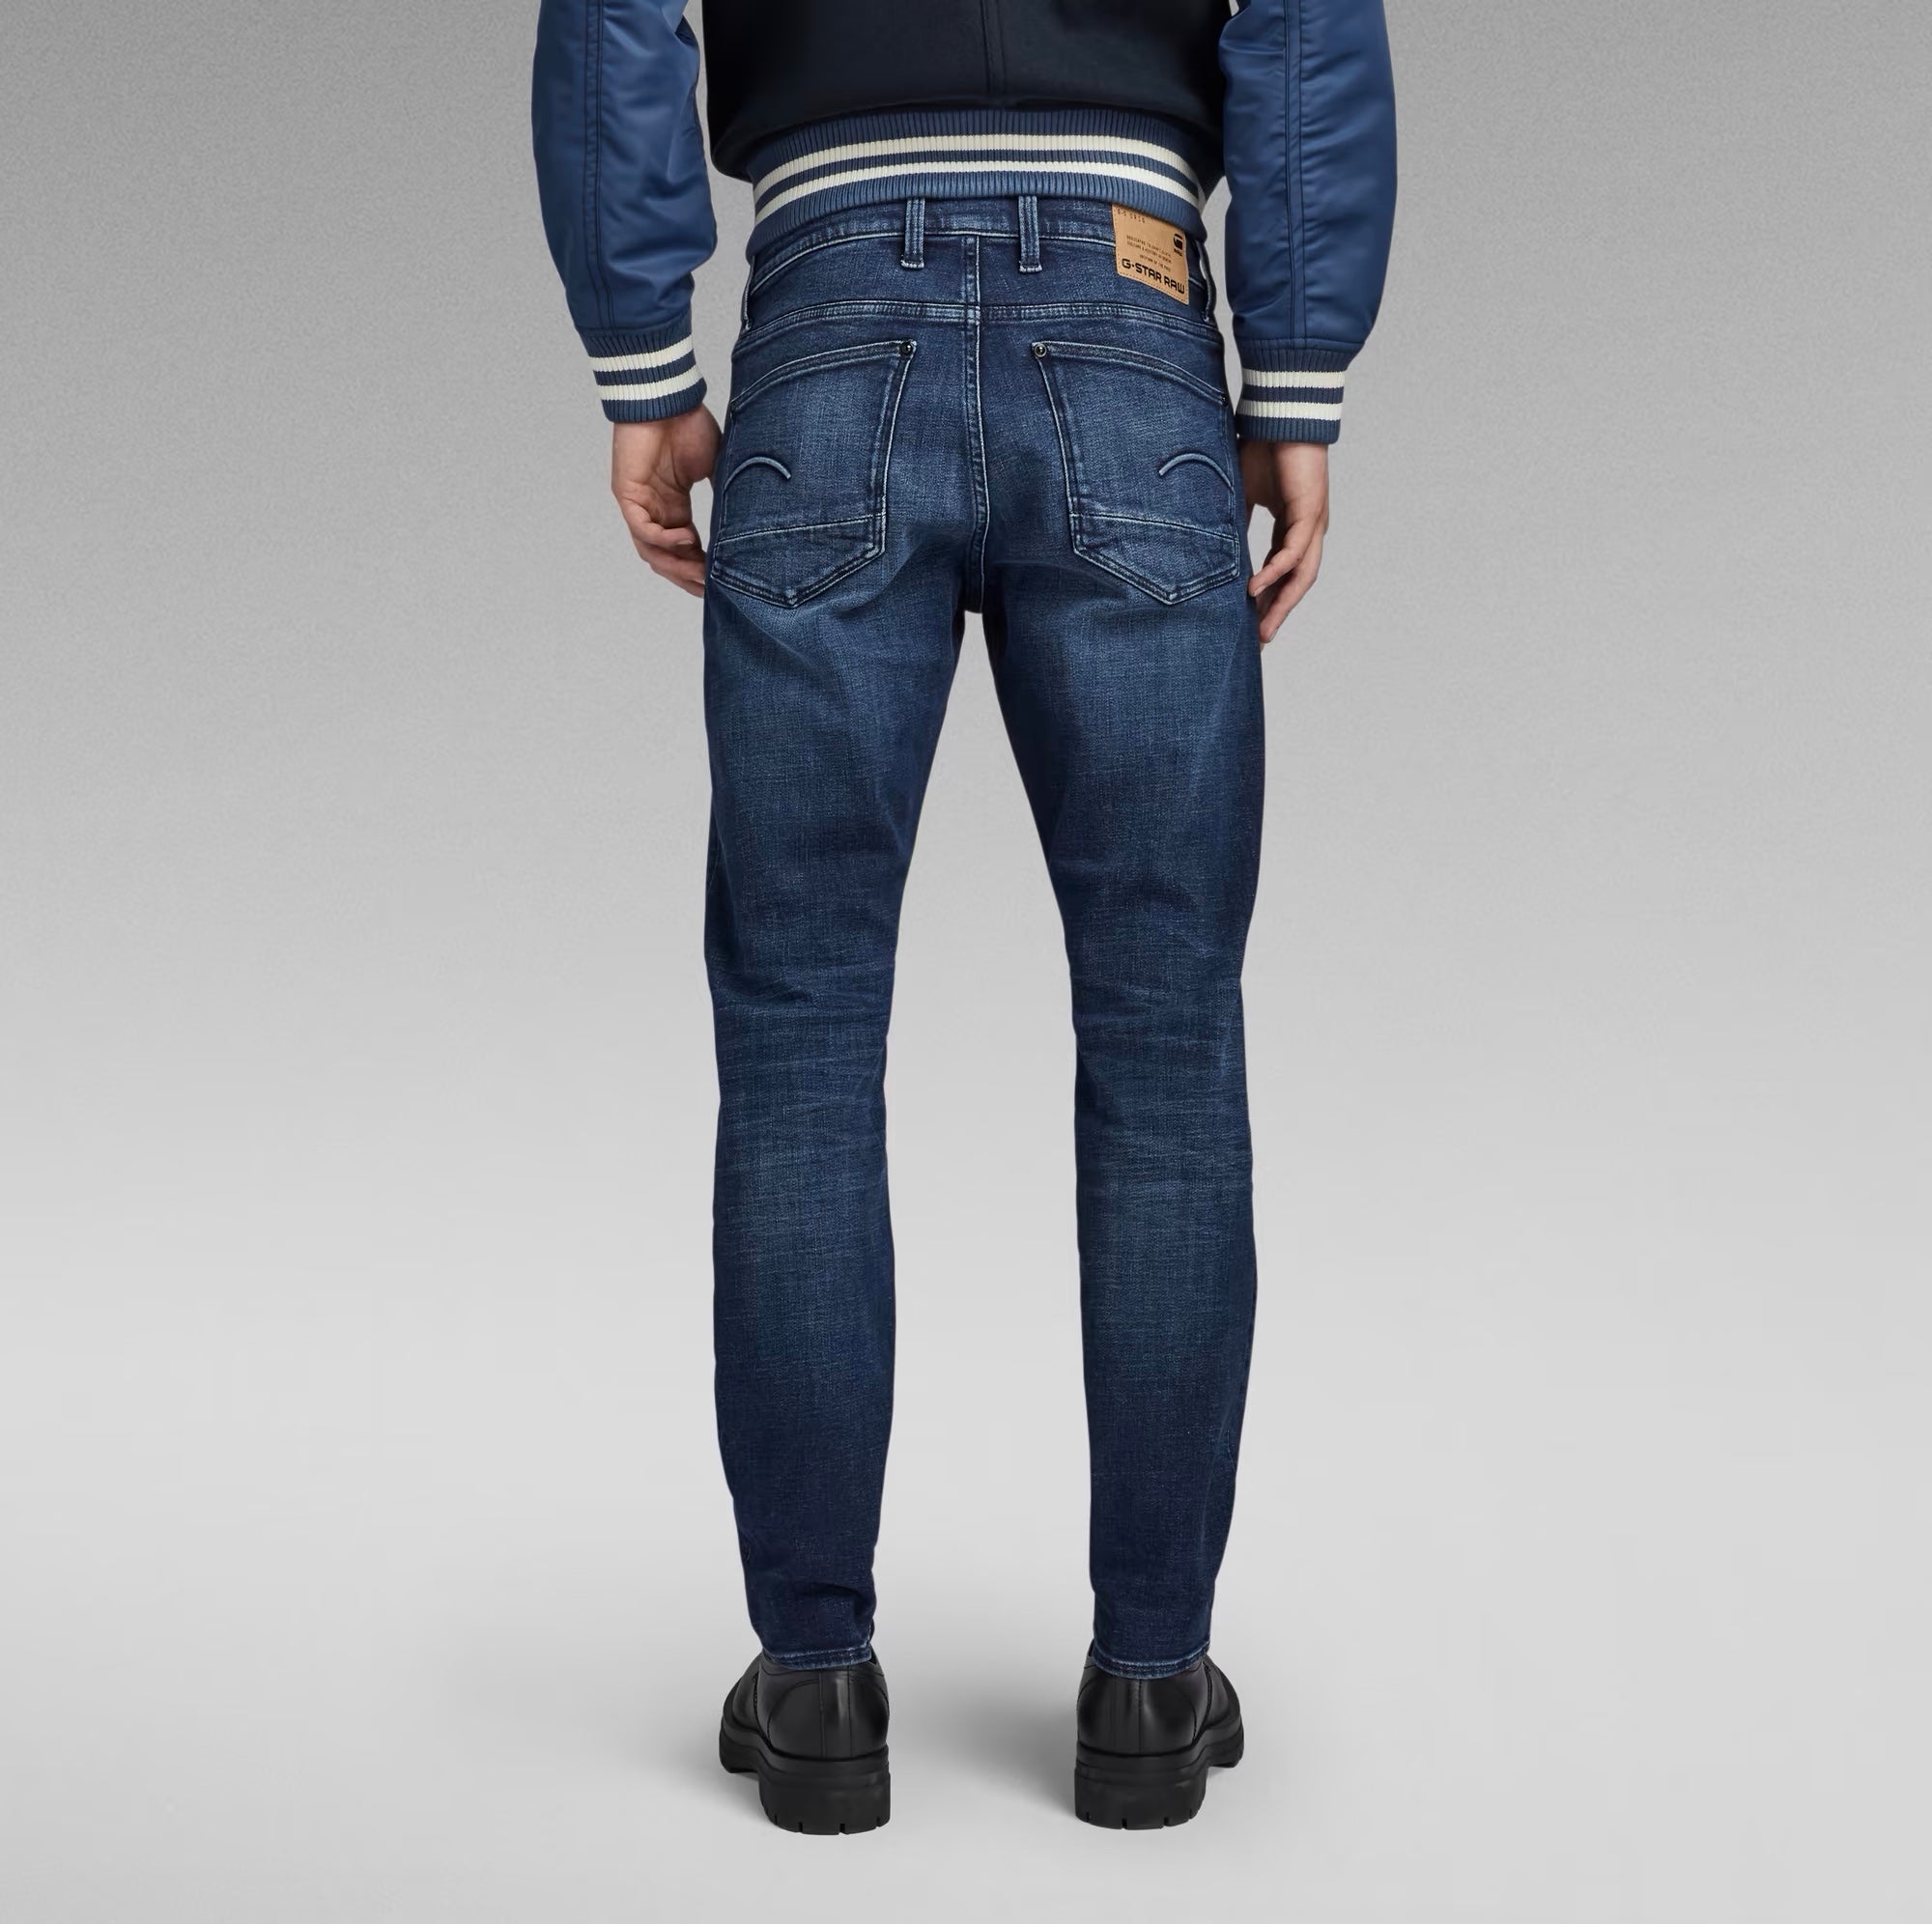 Revend FWD Skinny Jeans Worn in Himalayan Blue